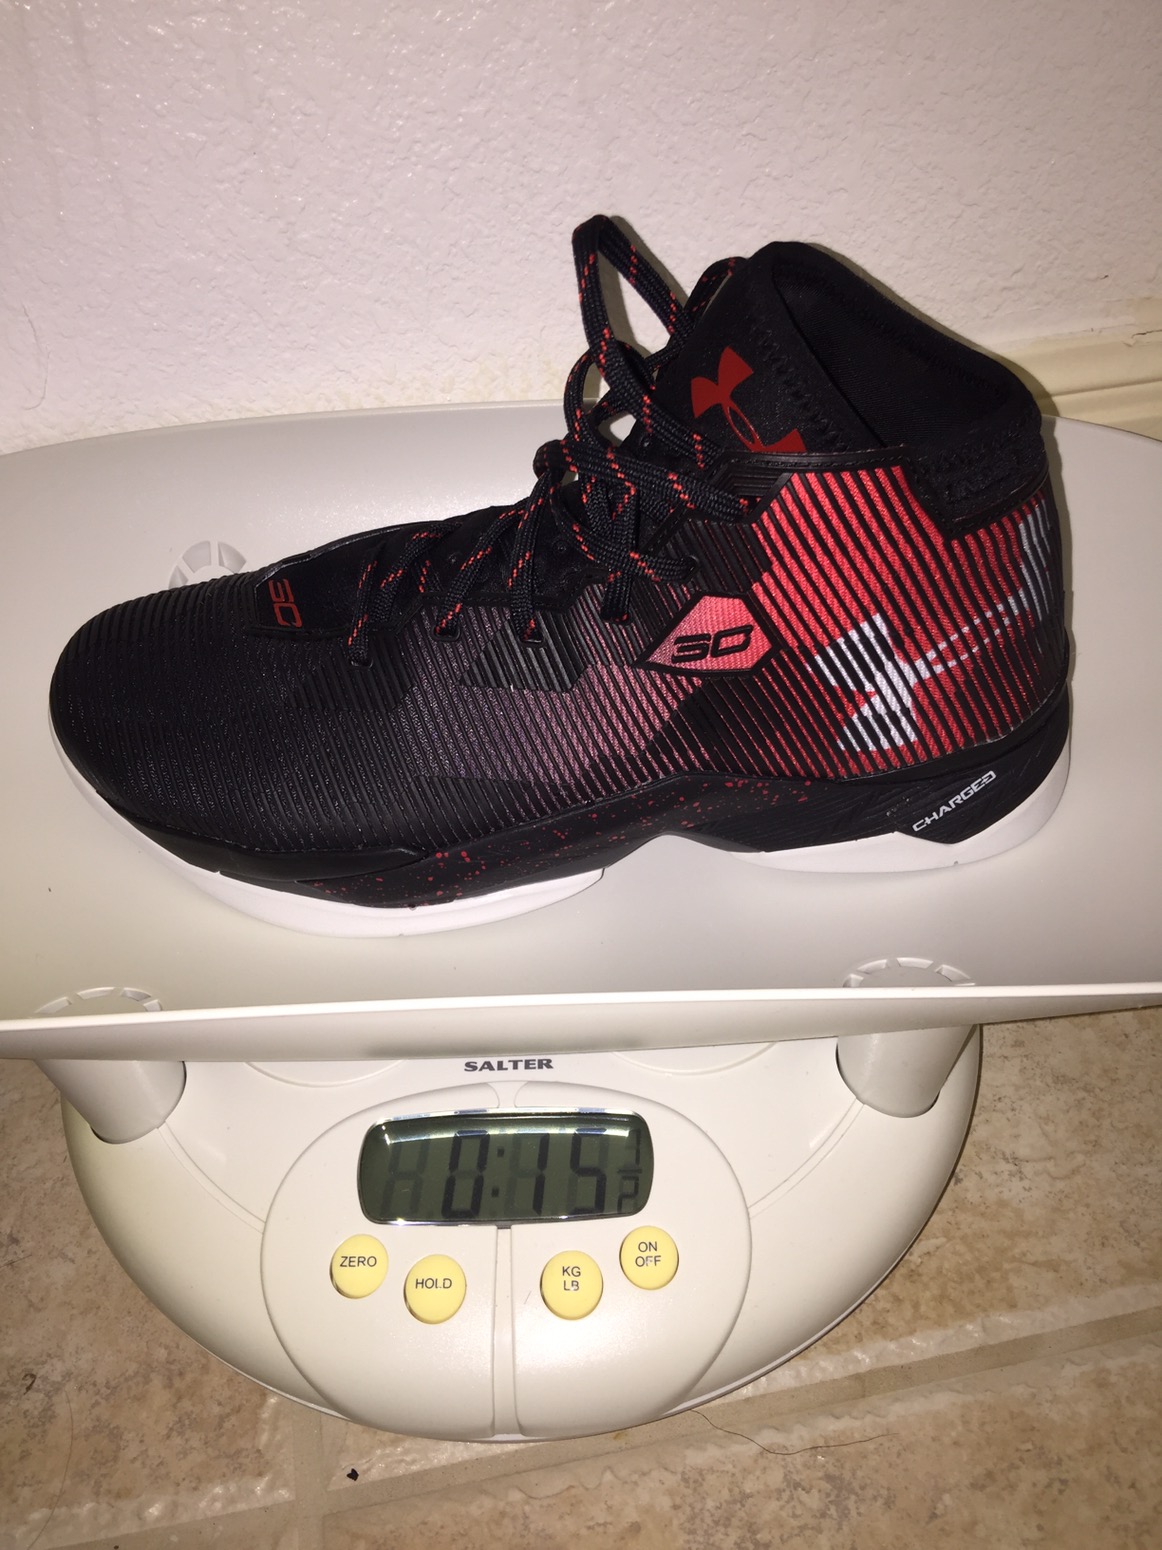 curry 2.5 performance review